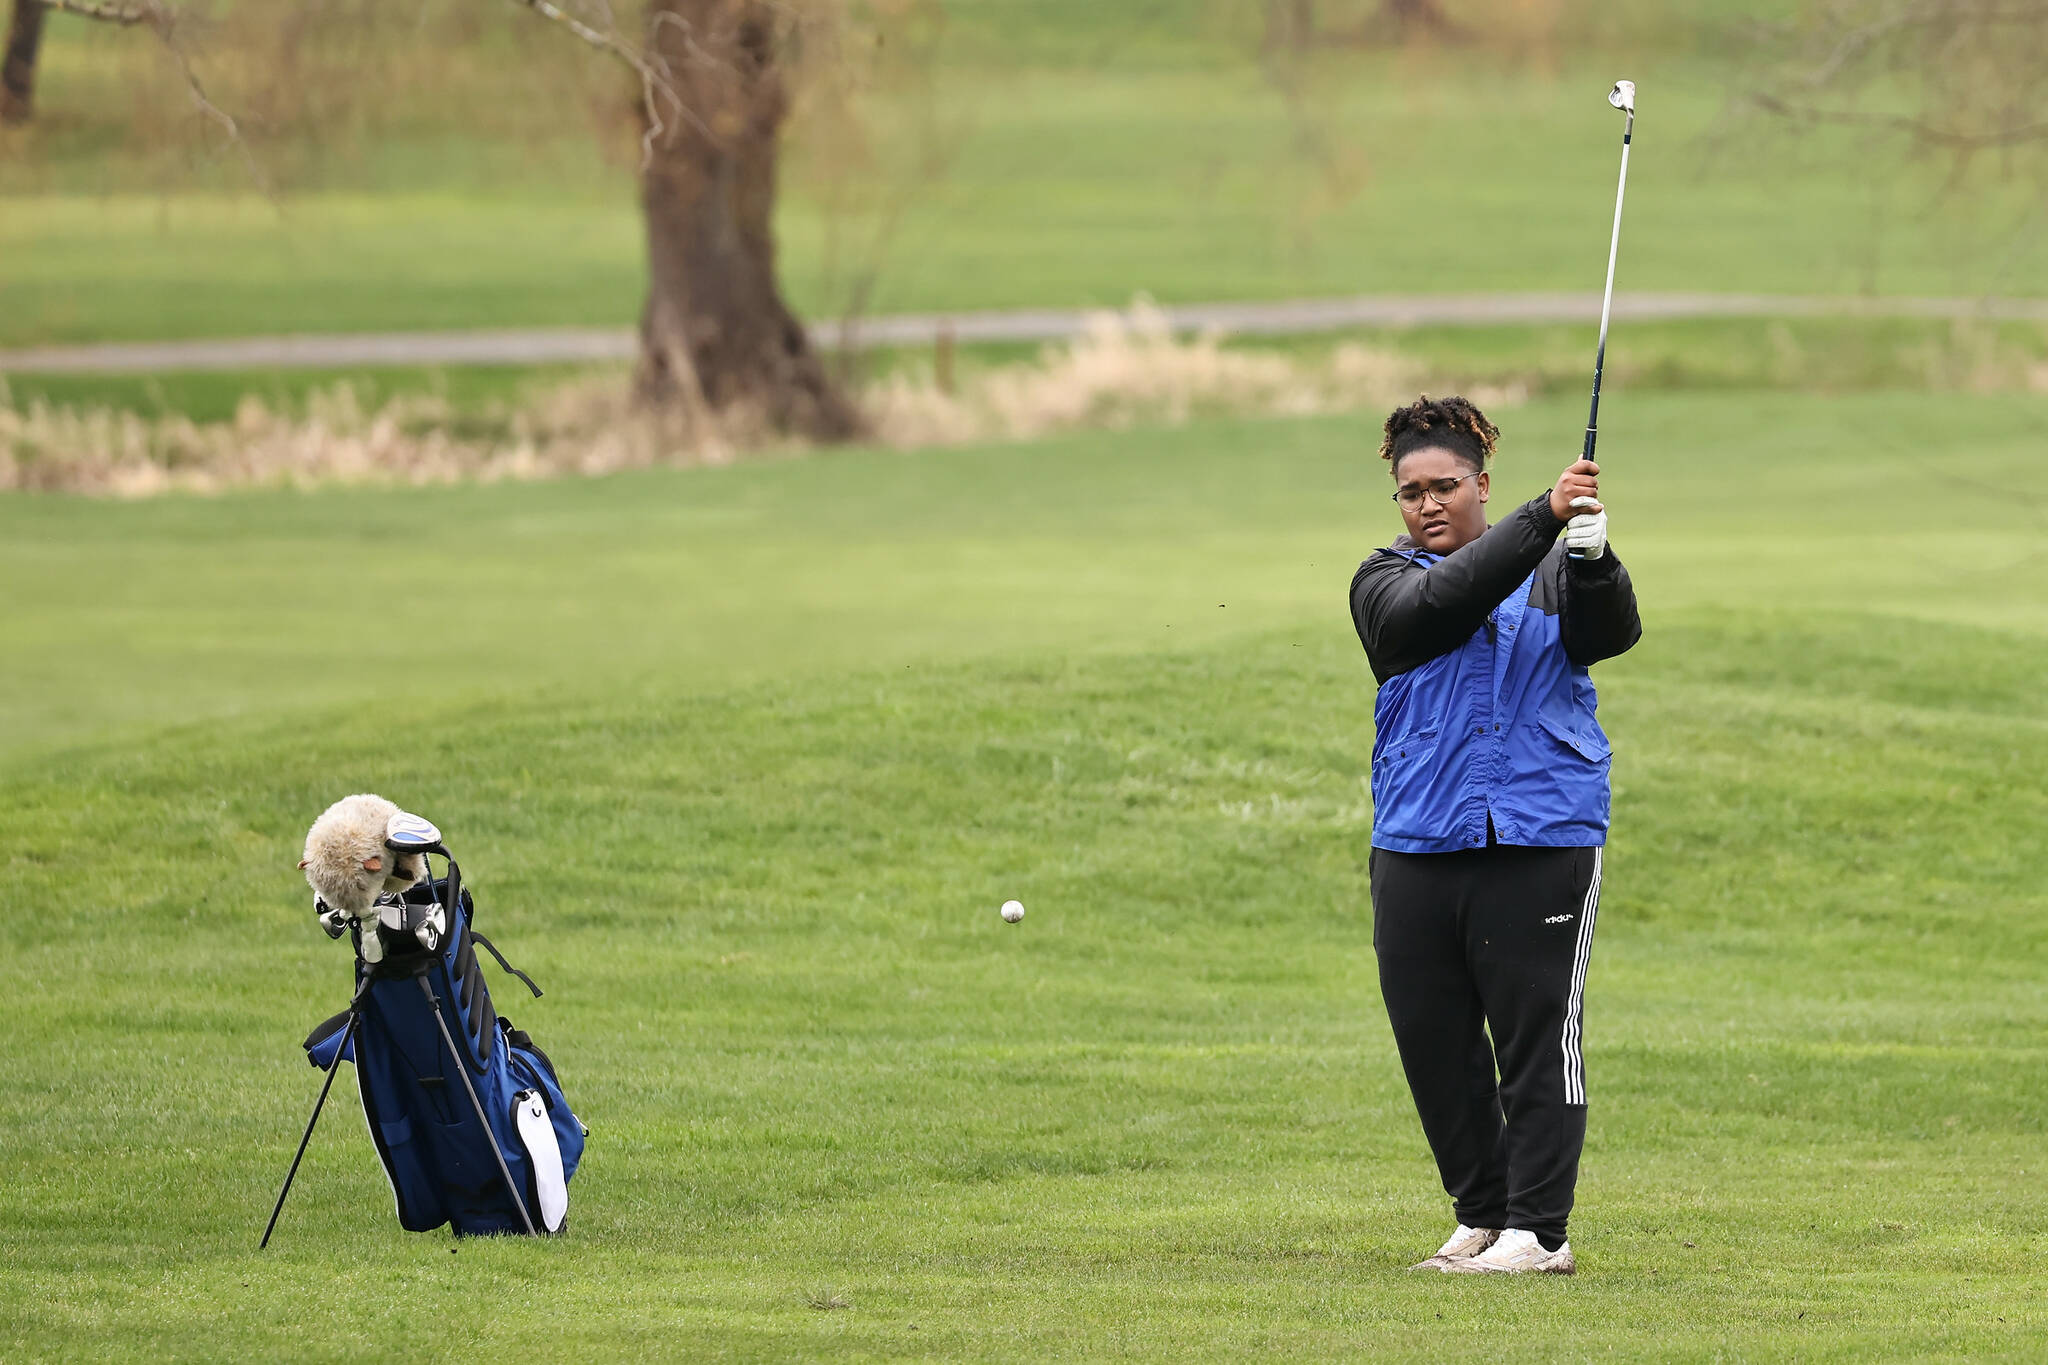 Photo by John Fisken
Junior Essence Bryant watches her shot head to the green. Coach Vicki Cable said the Falcons were excited to welcome Bryant to the team this year, who moved to Whidbey Island from Georgia.